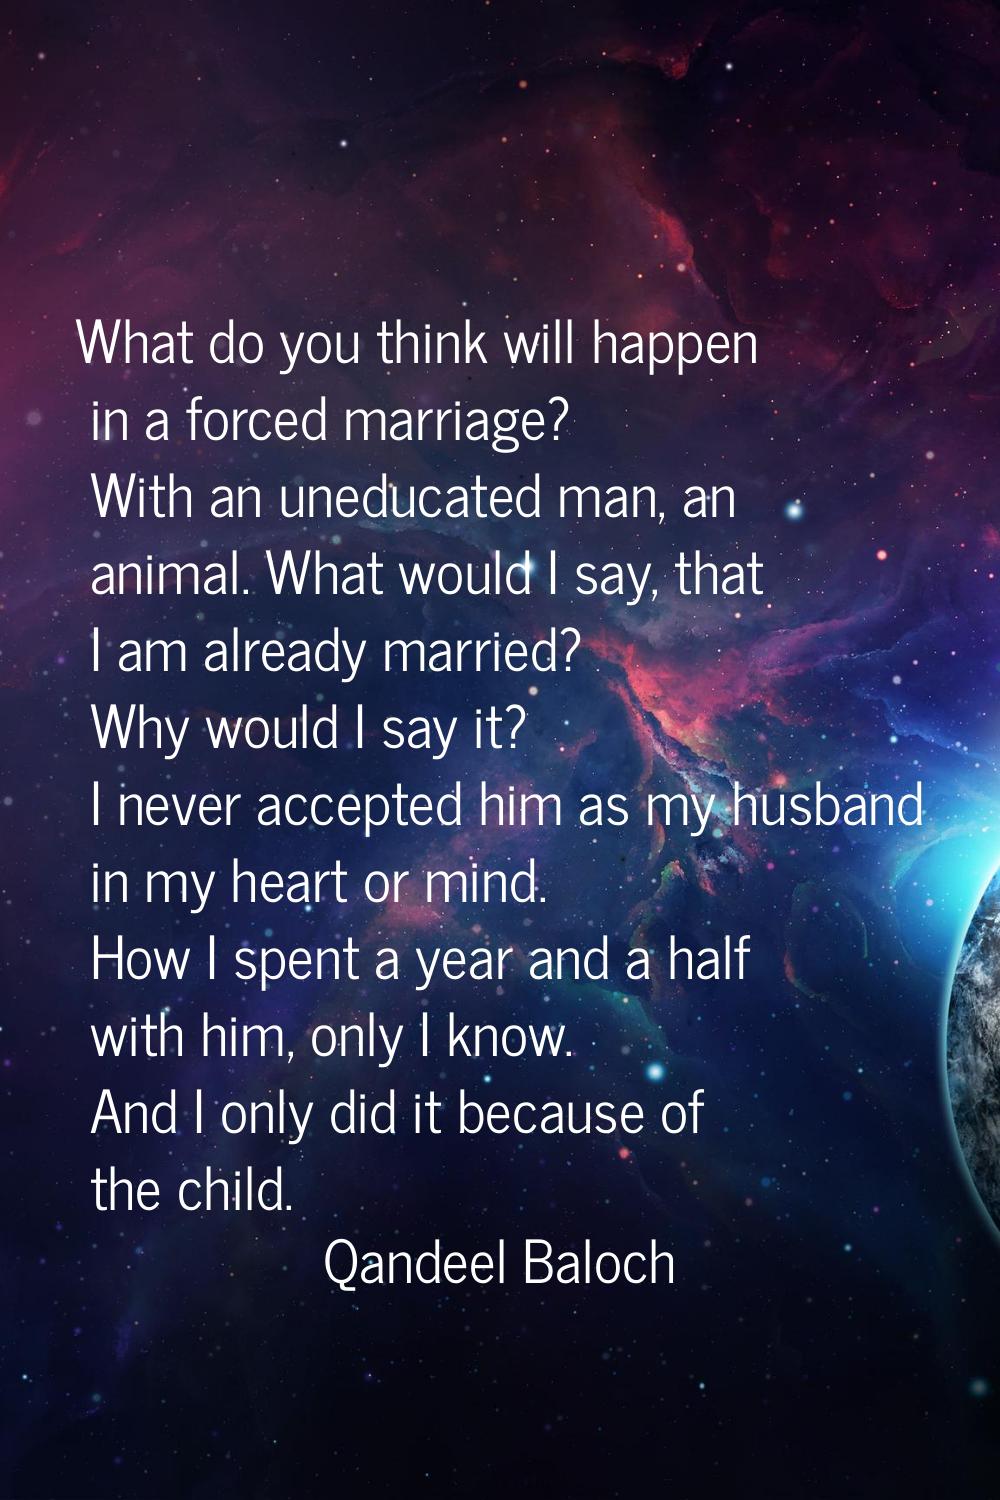 What do you think will happen in a forced marriage? With an uneducated man, an animal. What would I